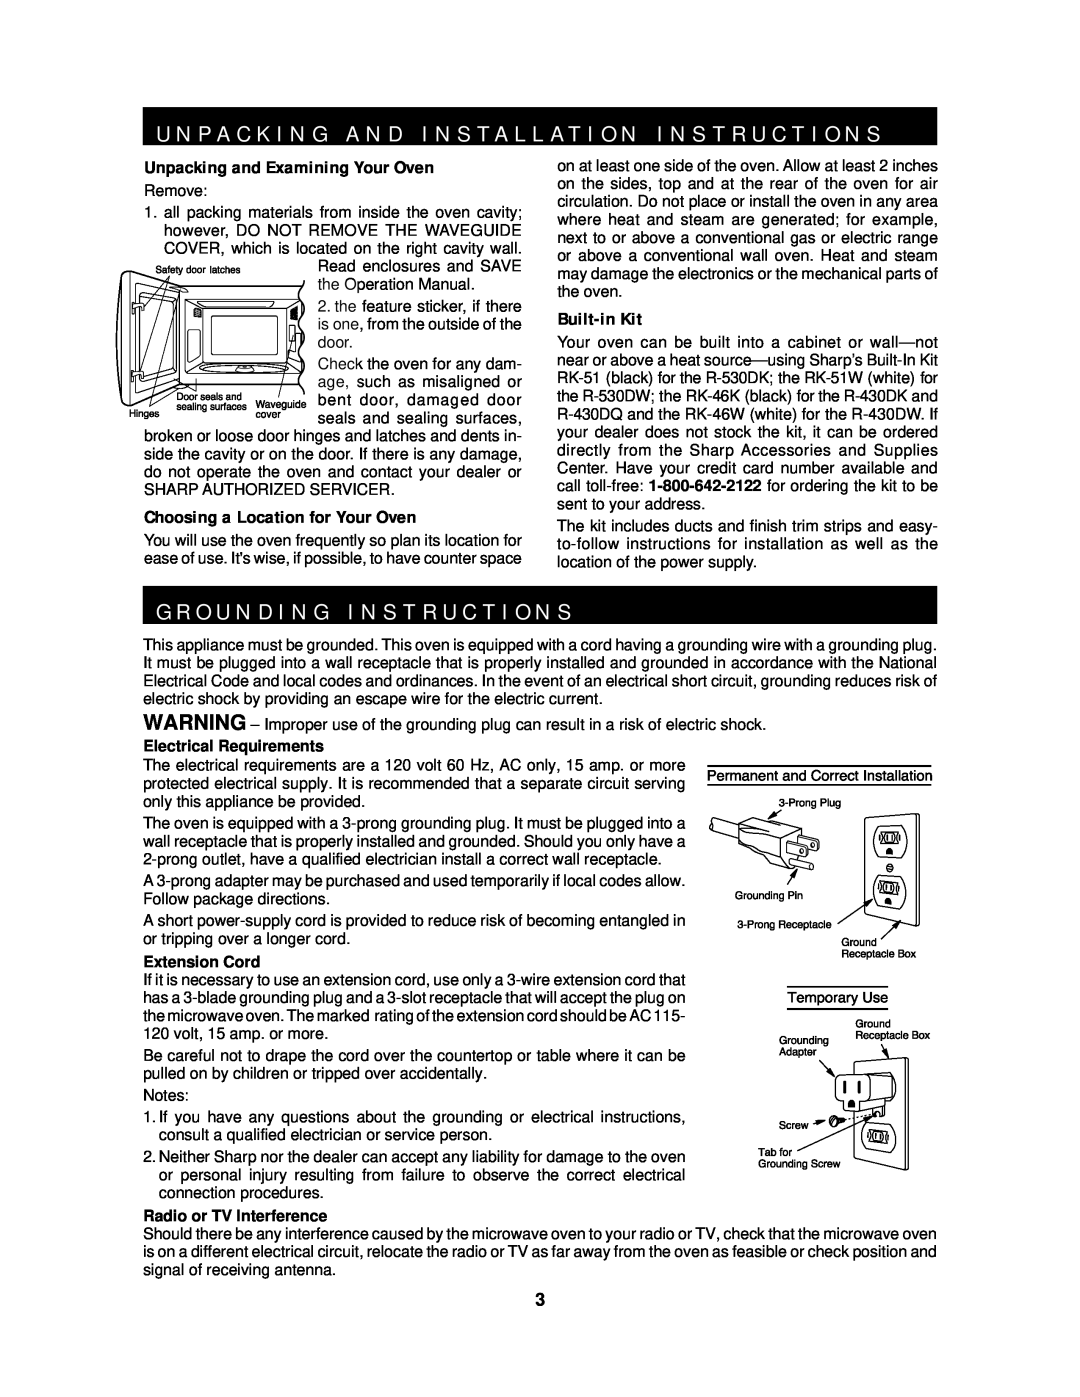 Sharp R-430D G R O U N D I N G I N S T R U C T I O N S, Unpacking and Examining Your Oven, Built-inKit, Extension Cord 